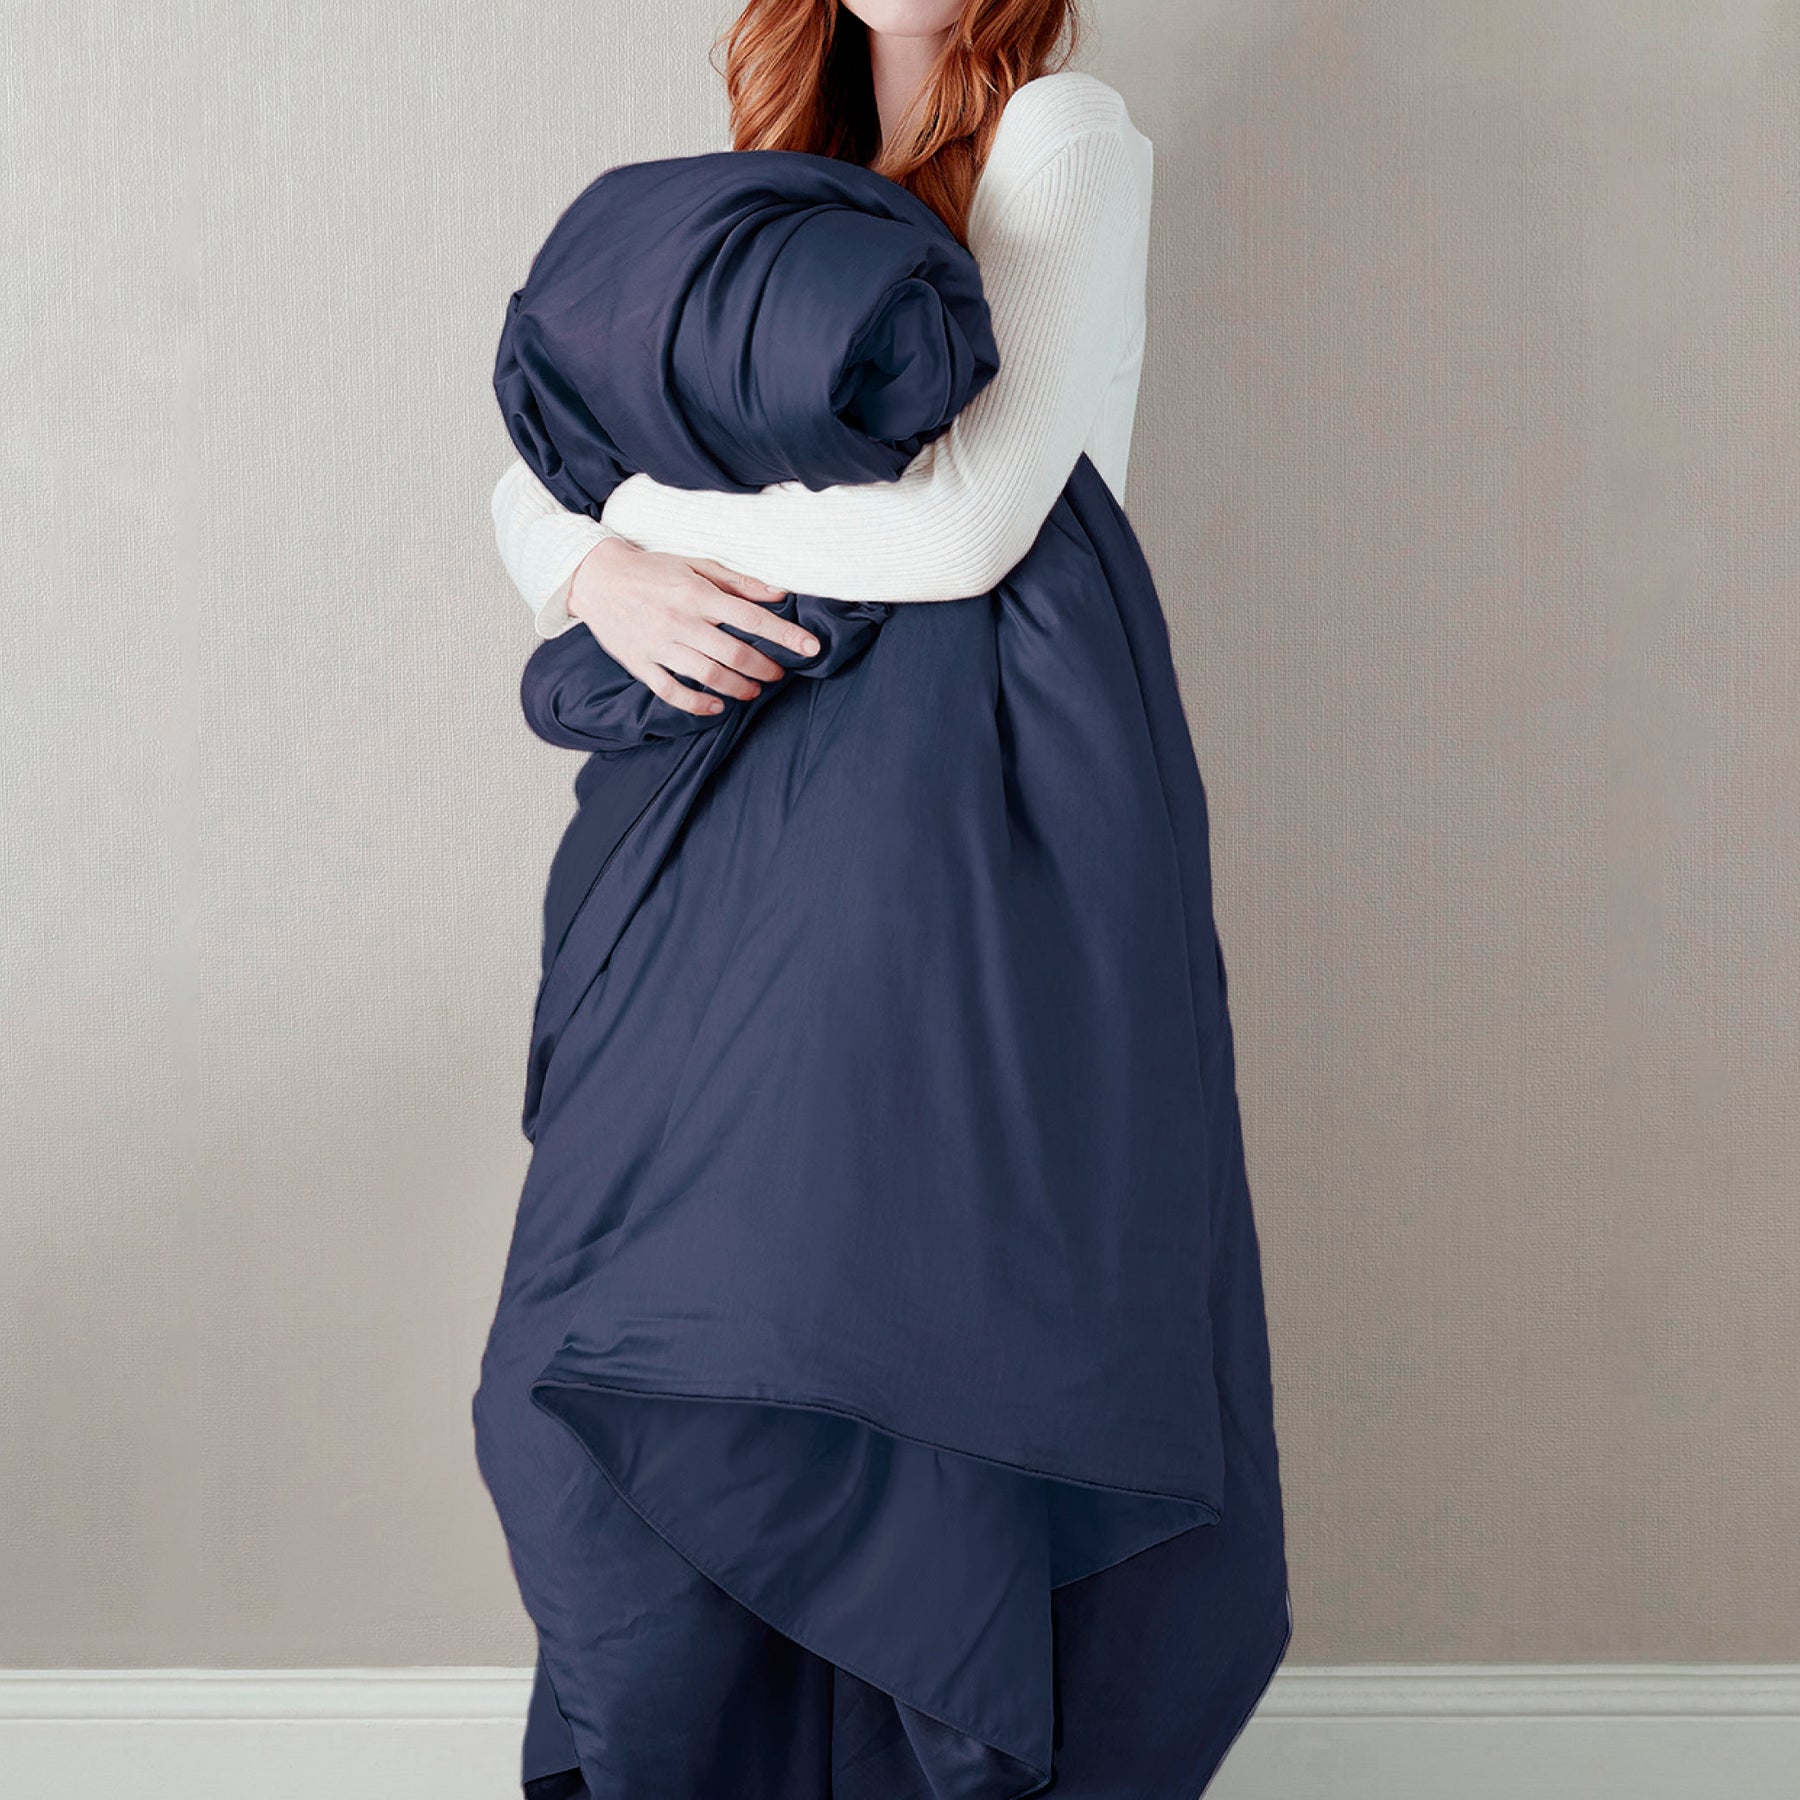 Image of a woman standing and holding the Midnight Soft Touch Duvet Cover against her